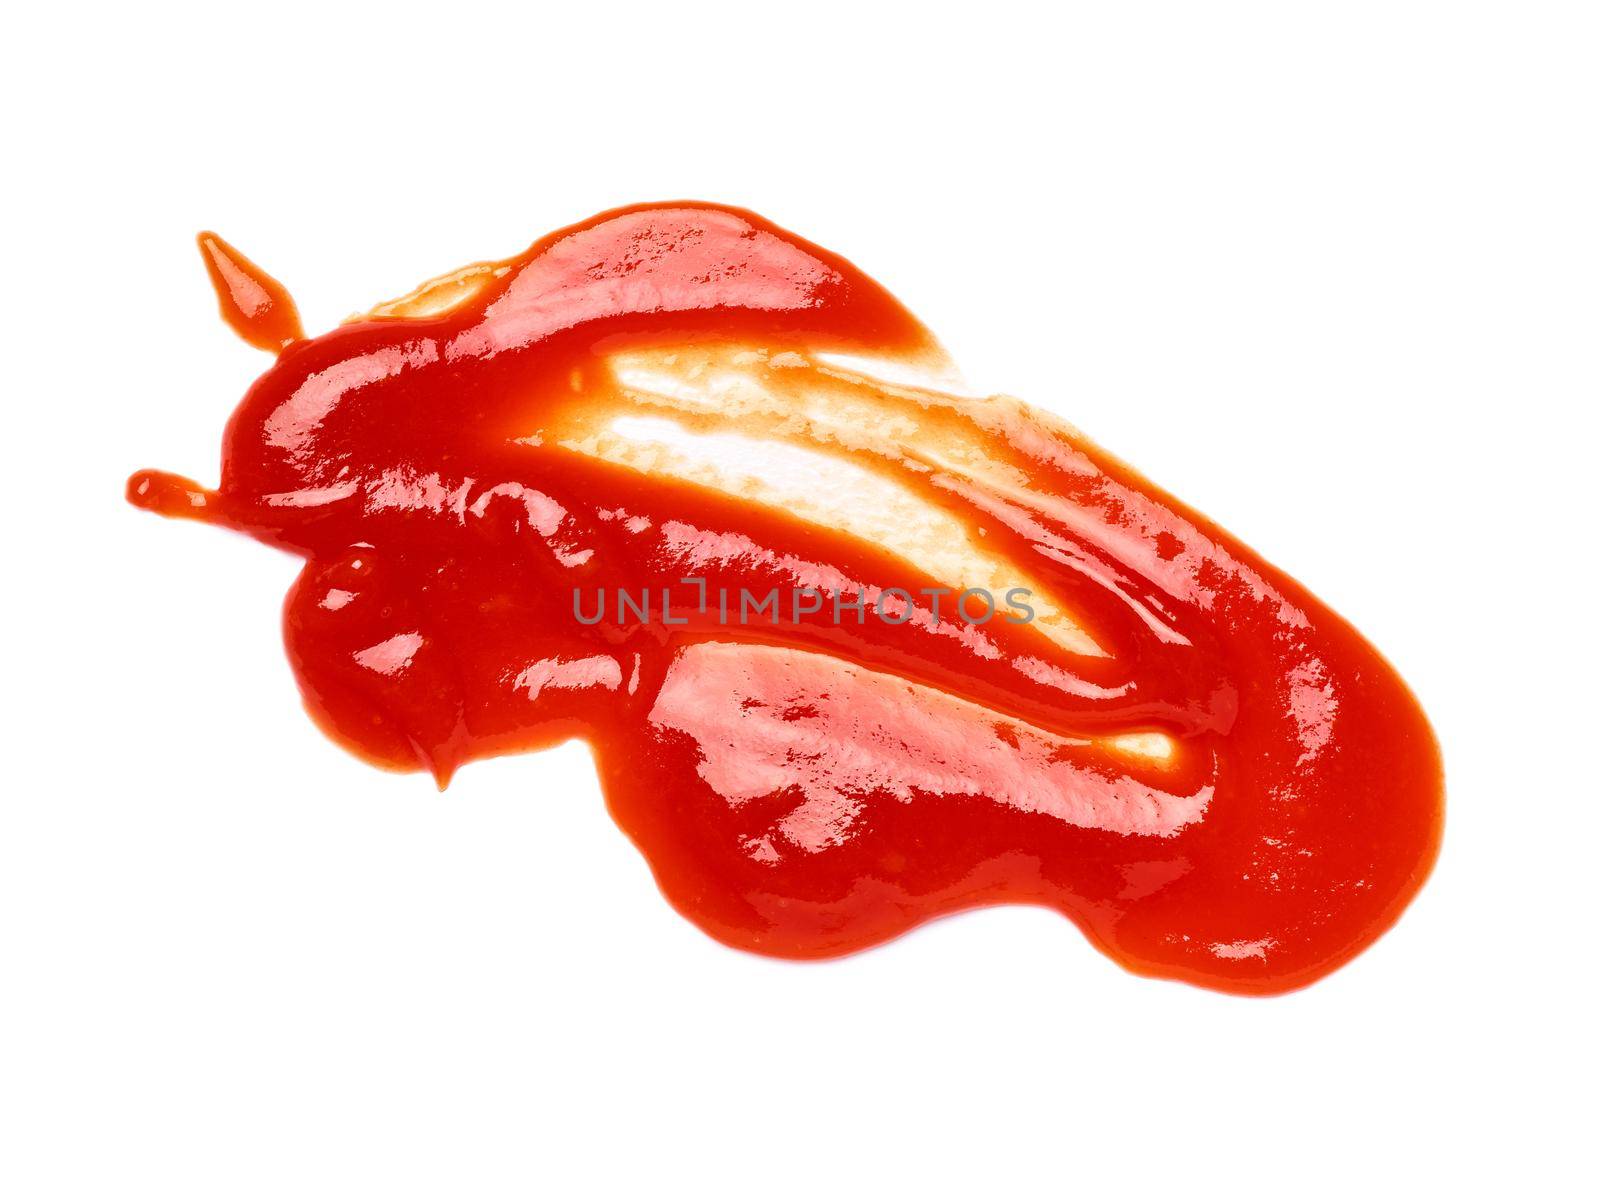 ketchup stain fleck food drop tomato sauce accident liquid splash dirty fleck red by Picsfive